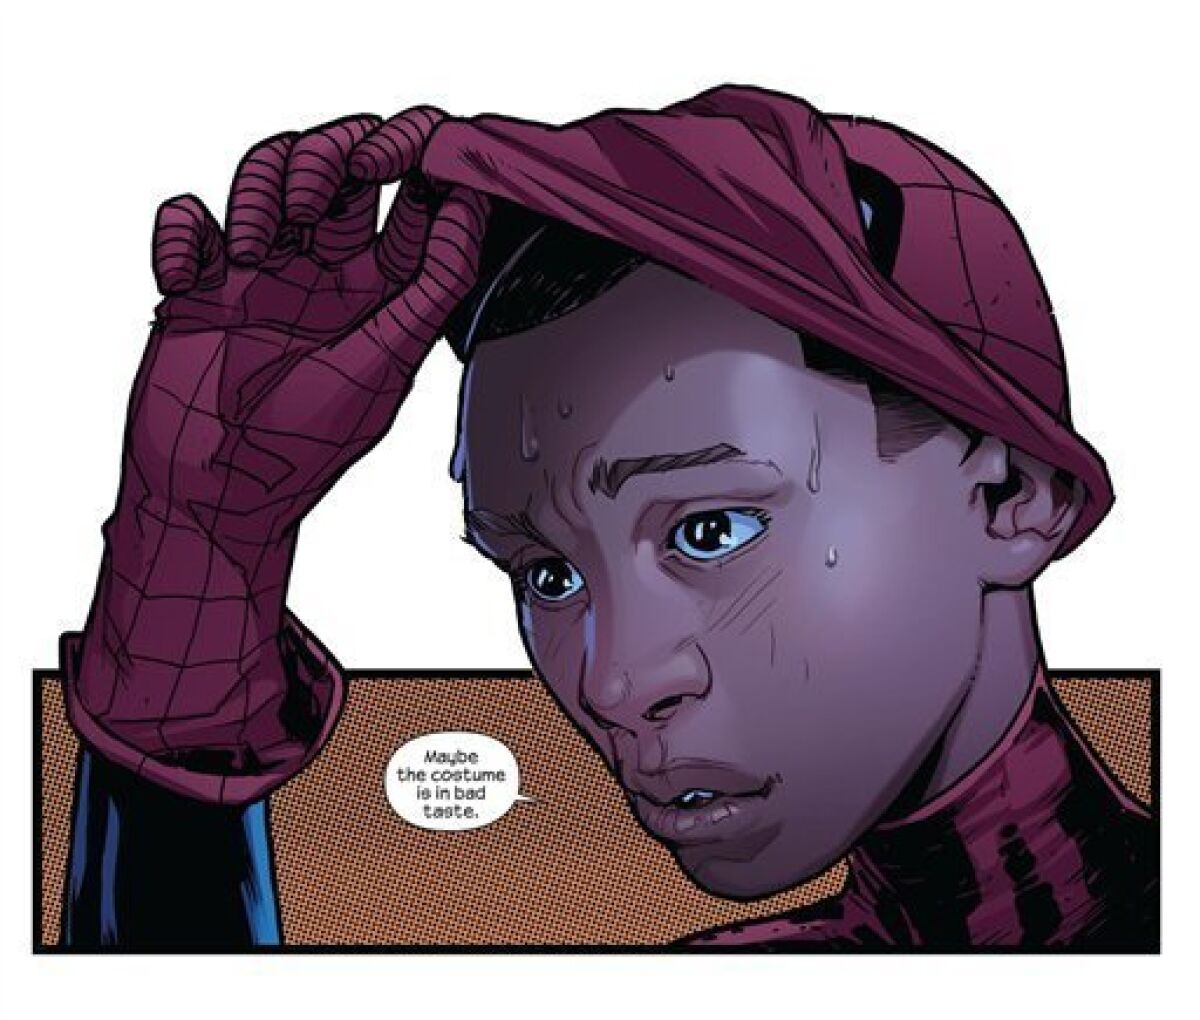  In “Ultimate Fallout,” the mantle of Spider-Man has been taken on by Miles Morales, a young African-American.